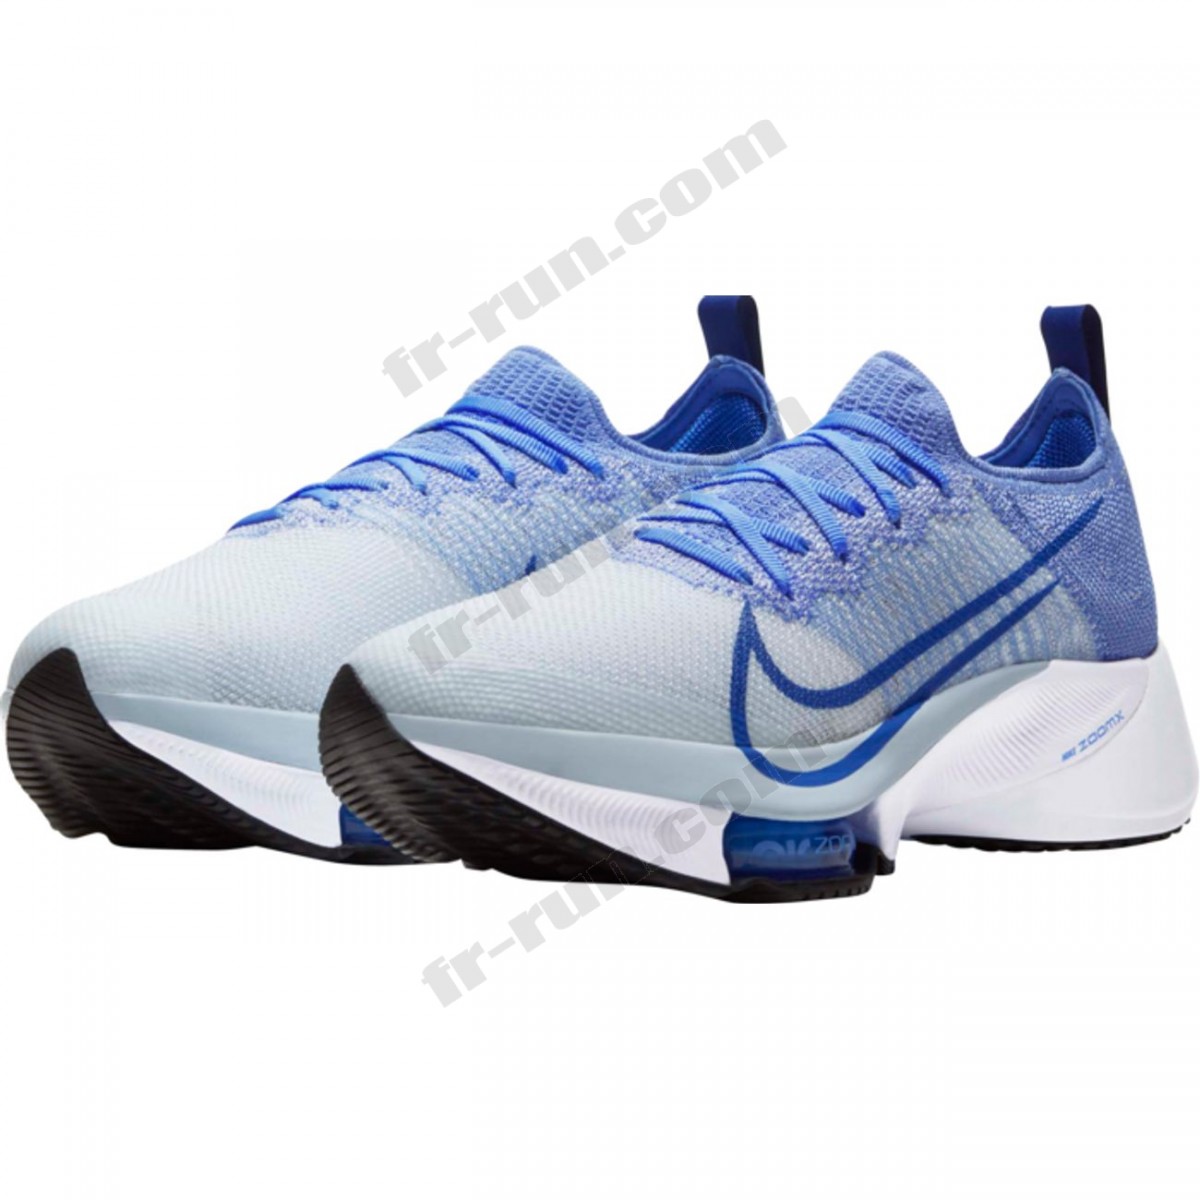 Nike/CHAUSSURES BASSES running femme NIKE W NIKE AIR ZOOM TEMPO NEXT% FK ◇◇◇ Pas Cher Du Tout - -1